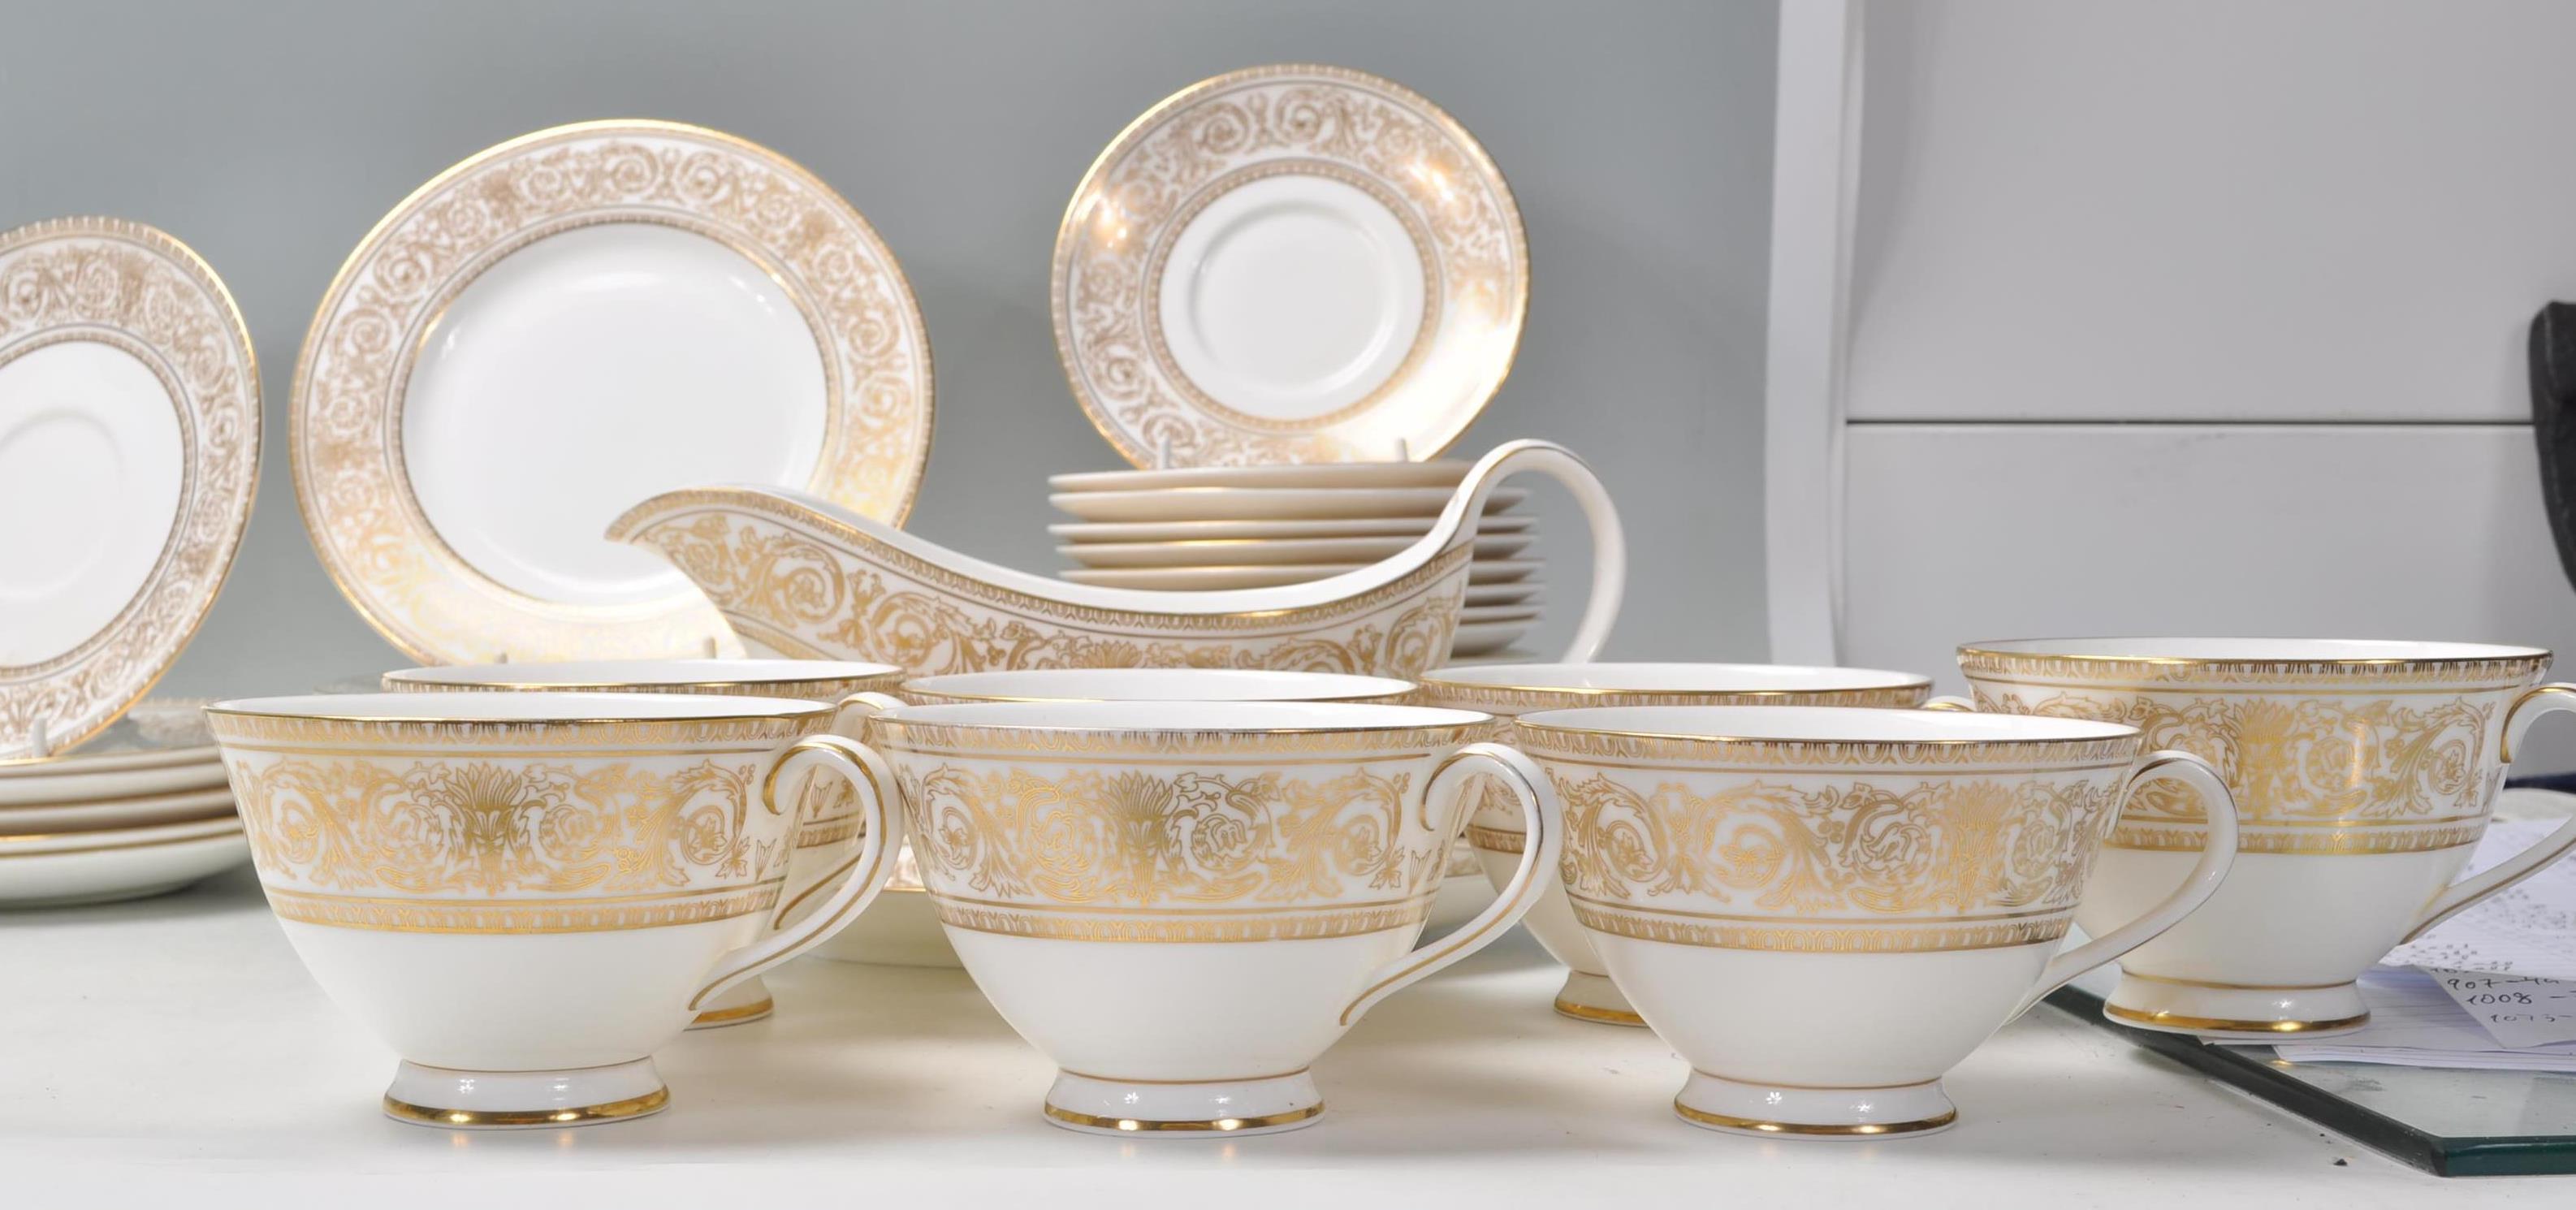 Royal Doulton Sovereign - A part Fine Bone China English dinner / coffee and tea service by Royal - Image 9 of 12